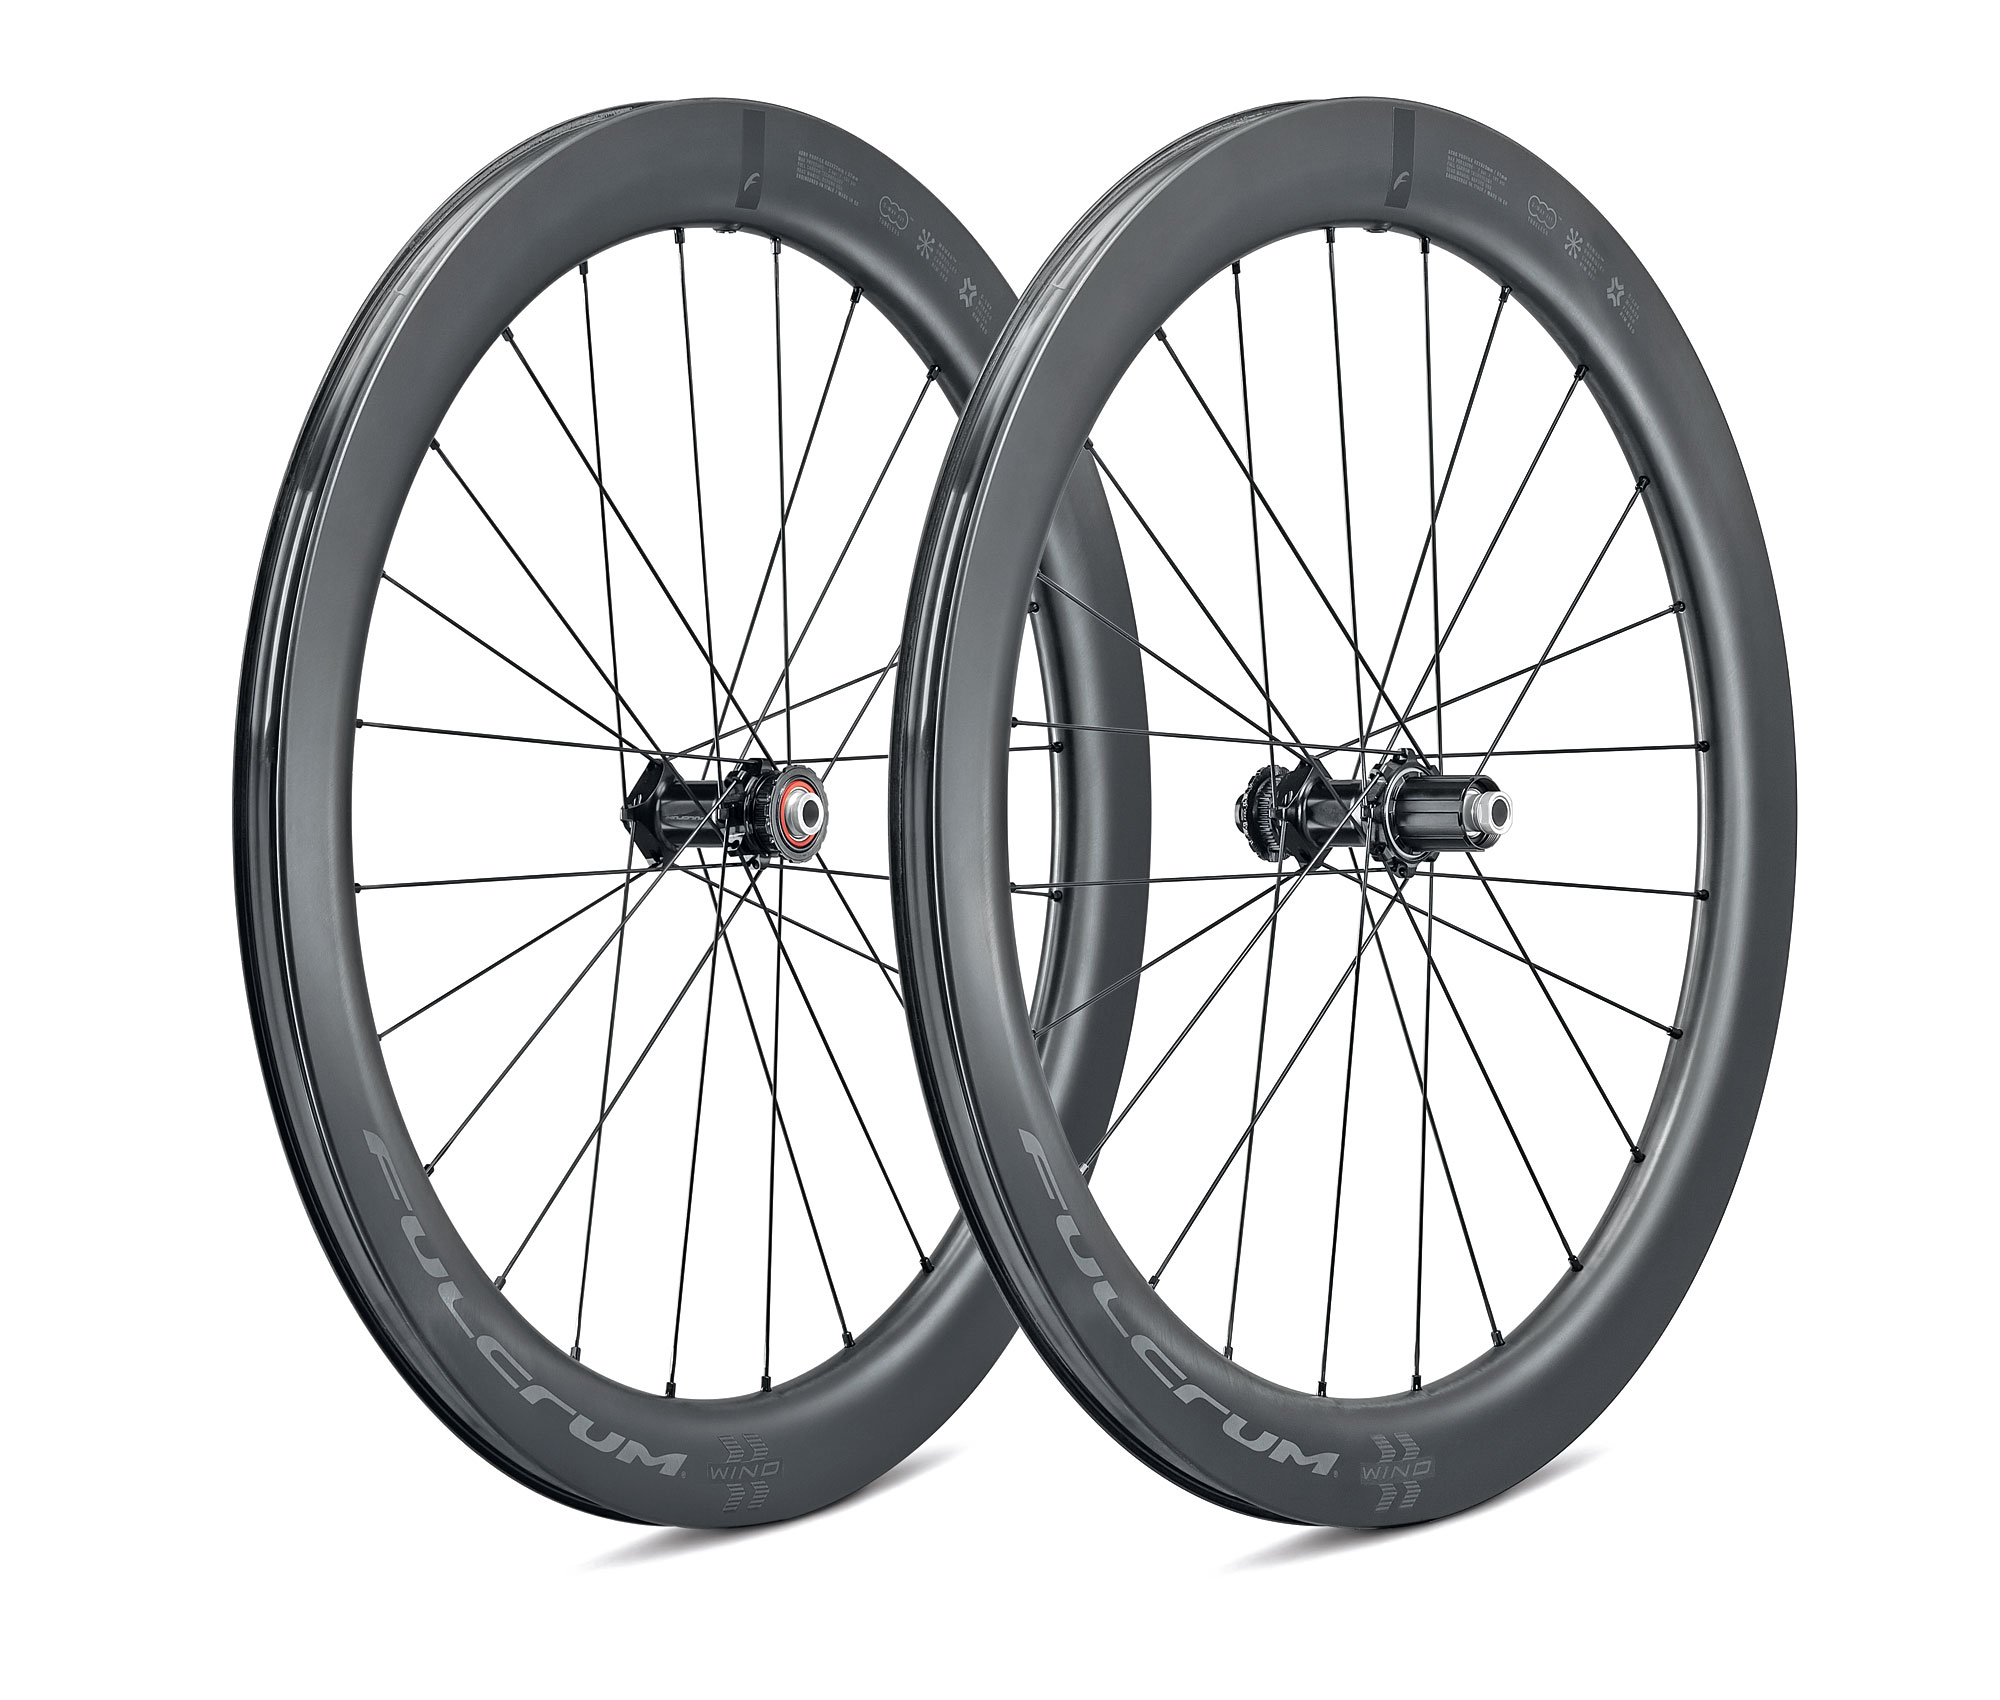 Fulcrum Wind 57mm affordable wide European aero carbon all road wheelset